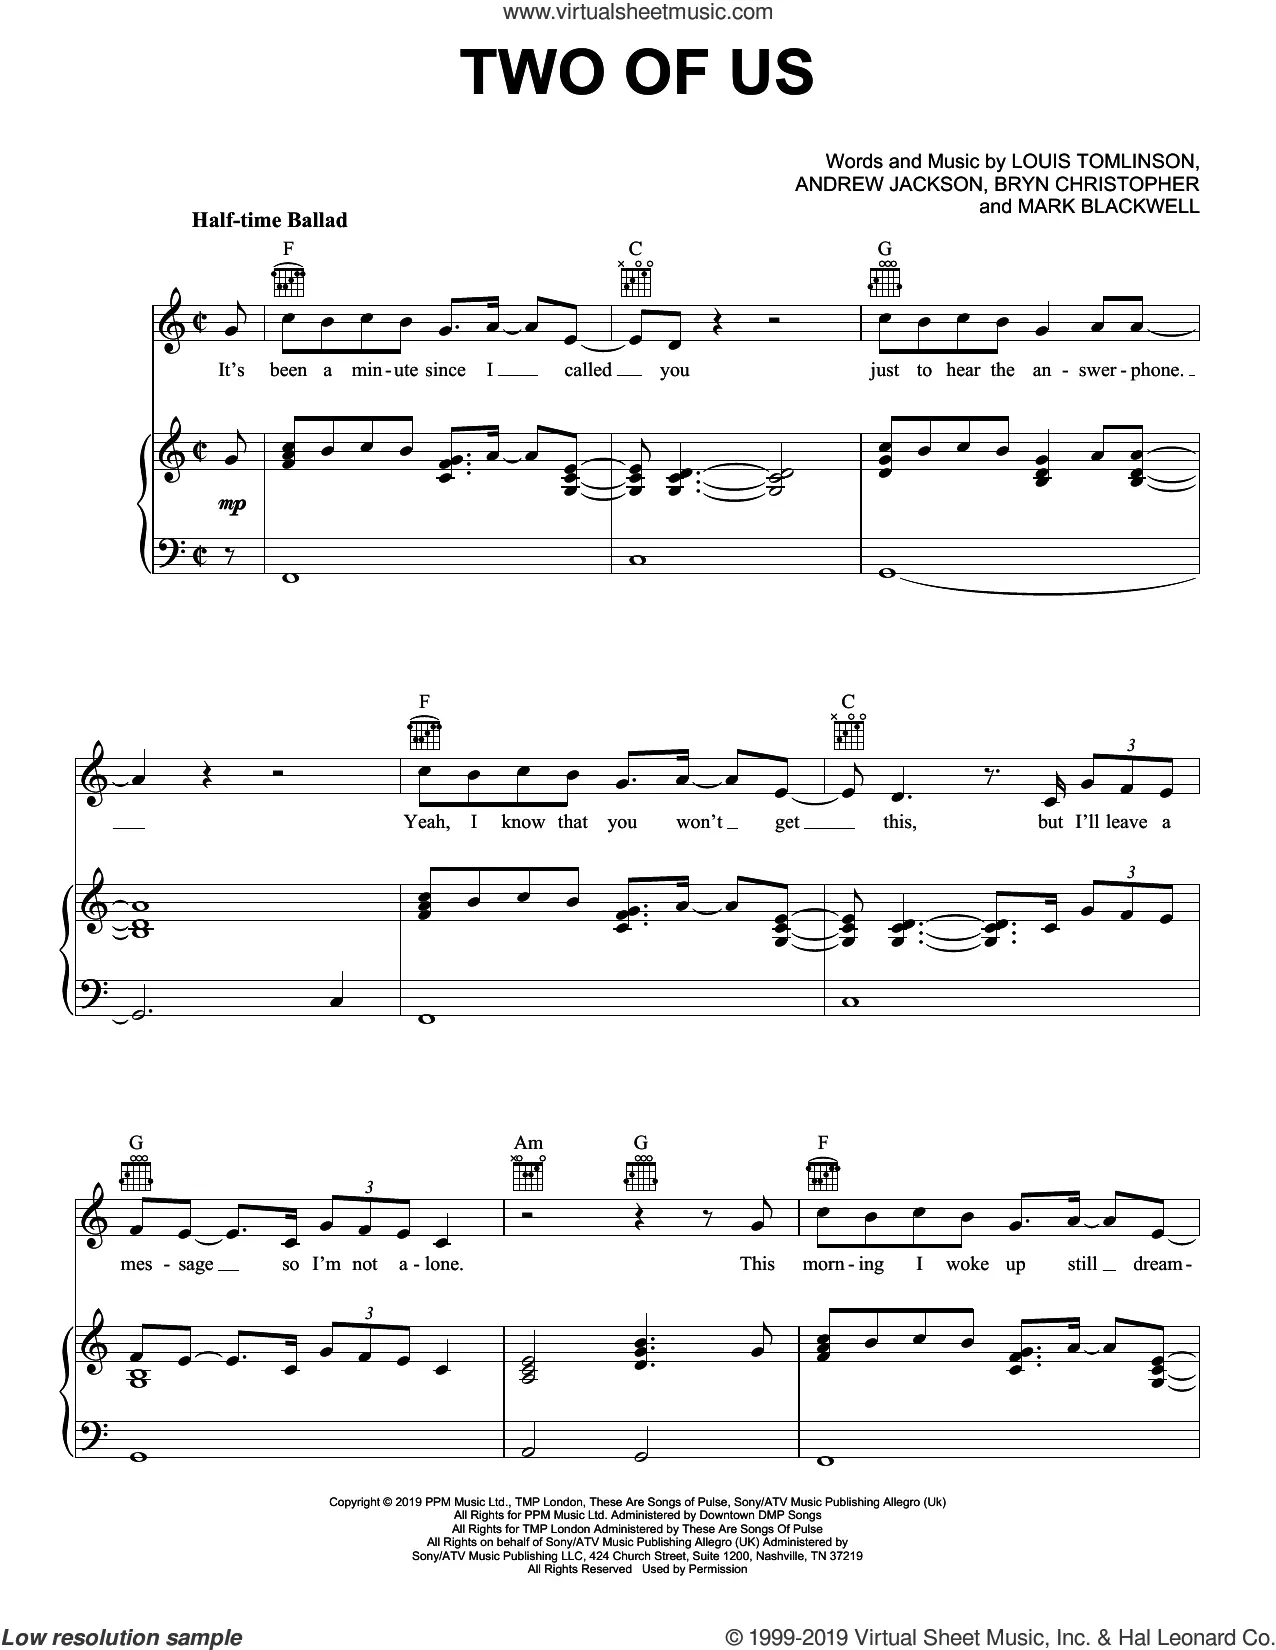 We Made It" Sheet Music by Louis Tomlinson for Piano/Vocal/Chords - Sheet  Music Now